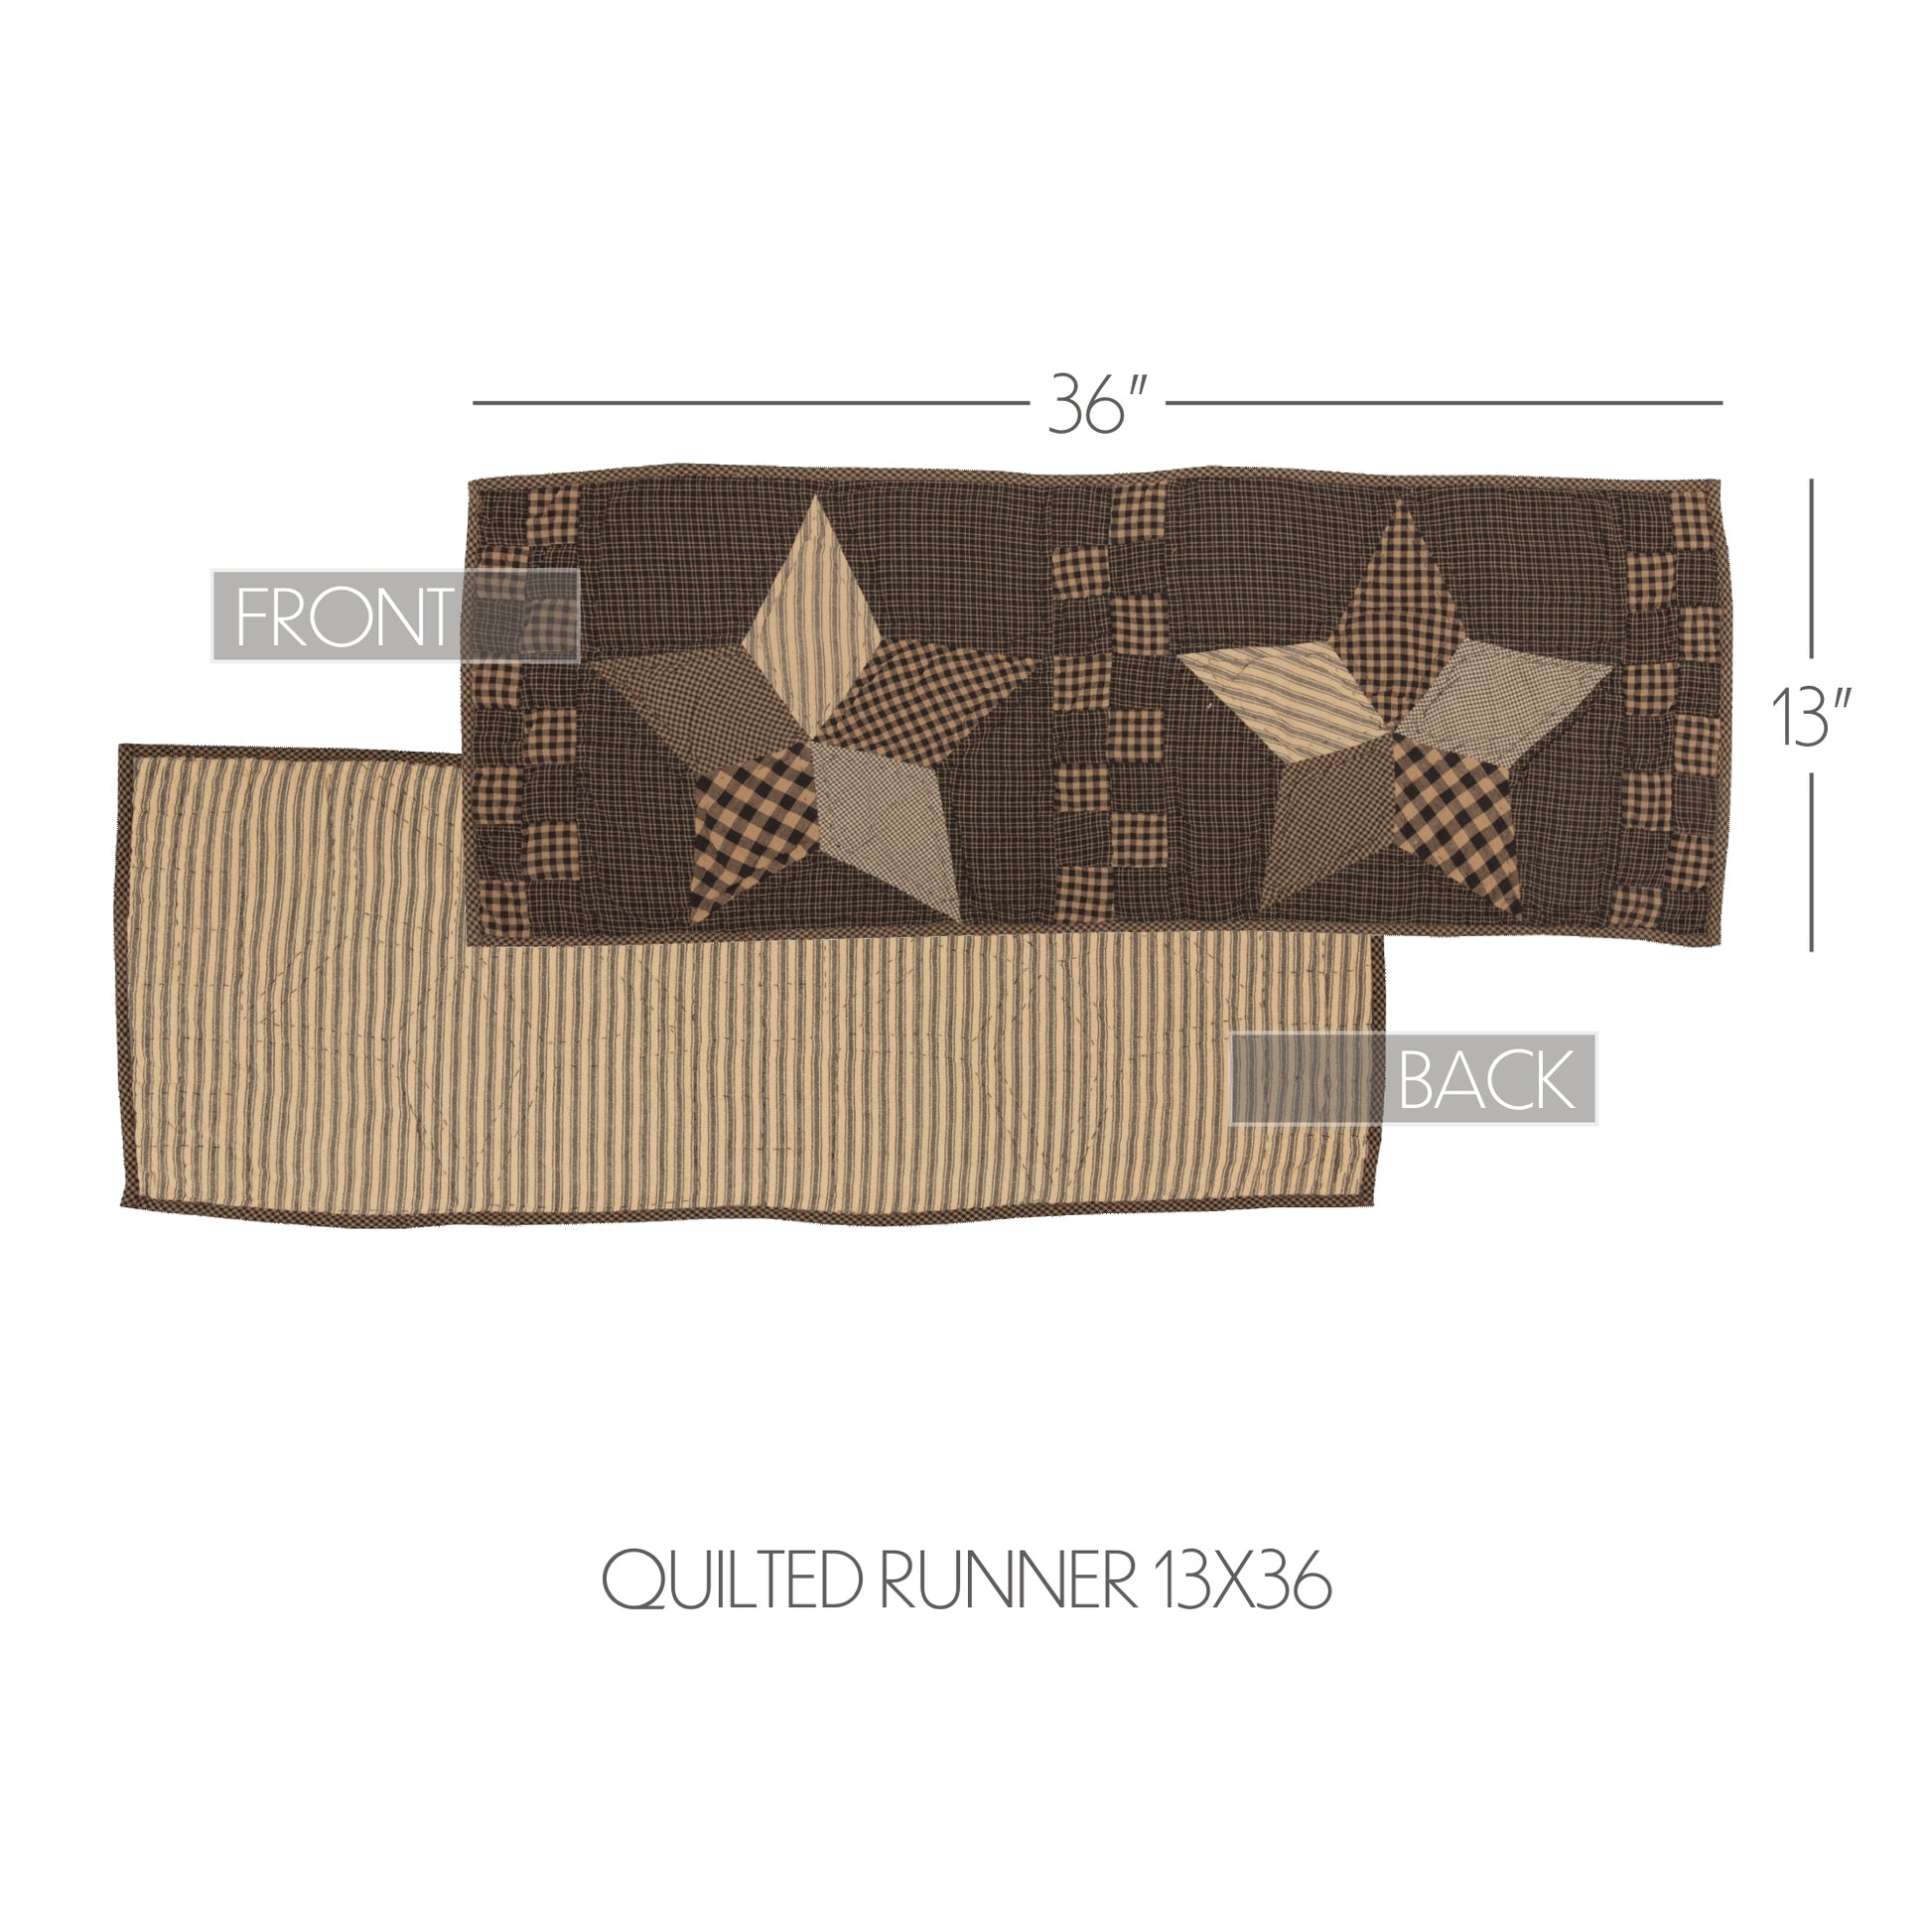 9841-Farmhouse-Star-Runner-Quilted-13x36-image-1